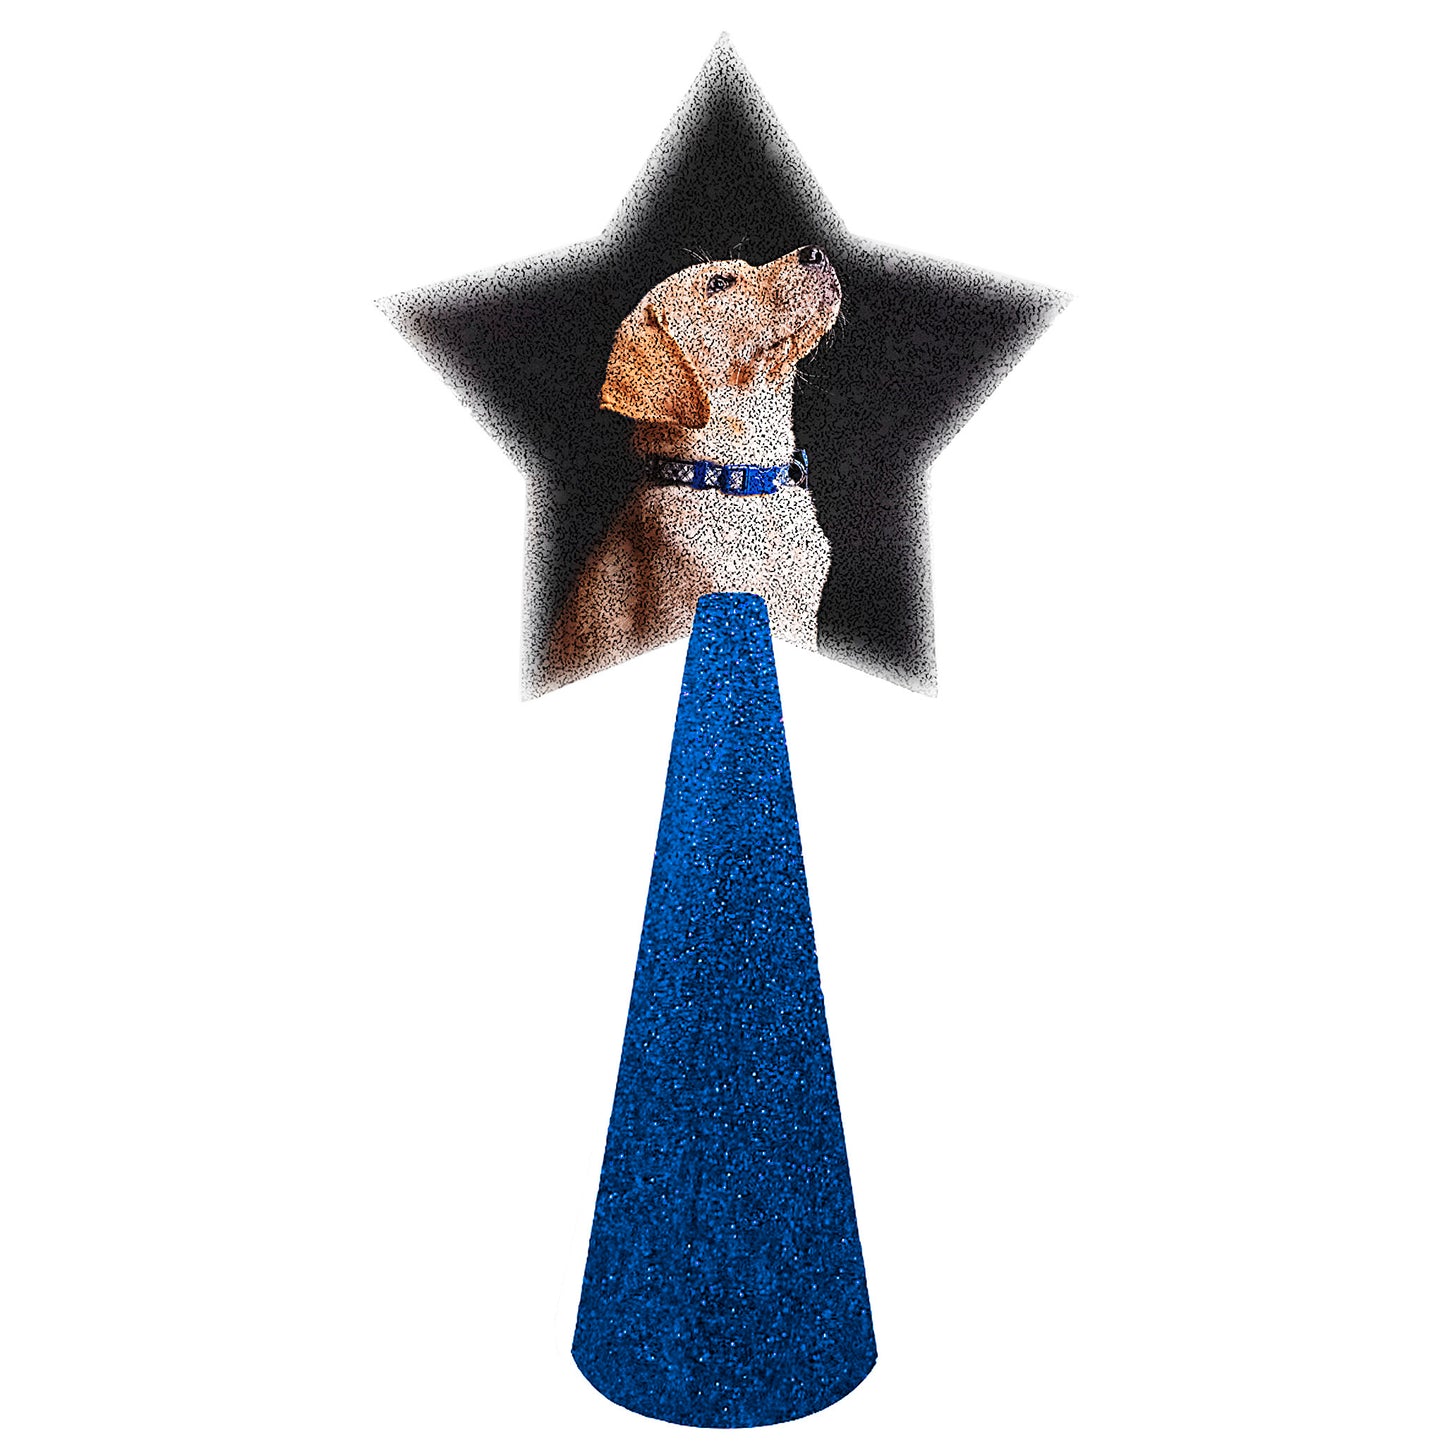 Custom tree topper with sample dog image on royal blue glitter cone double-sided front